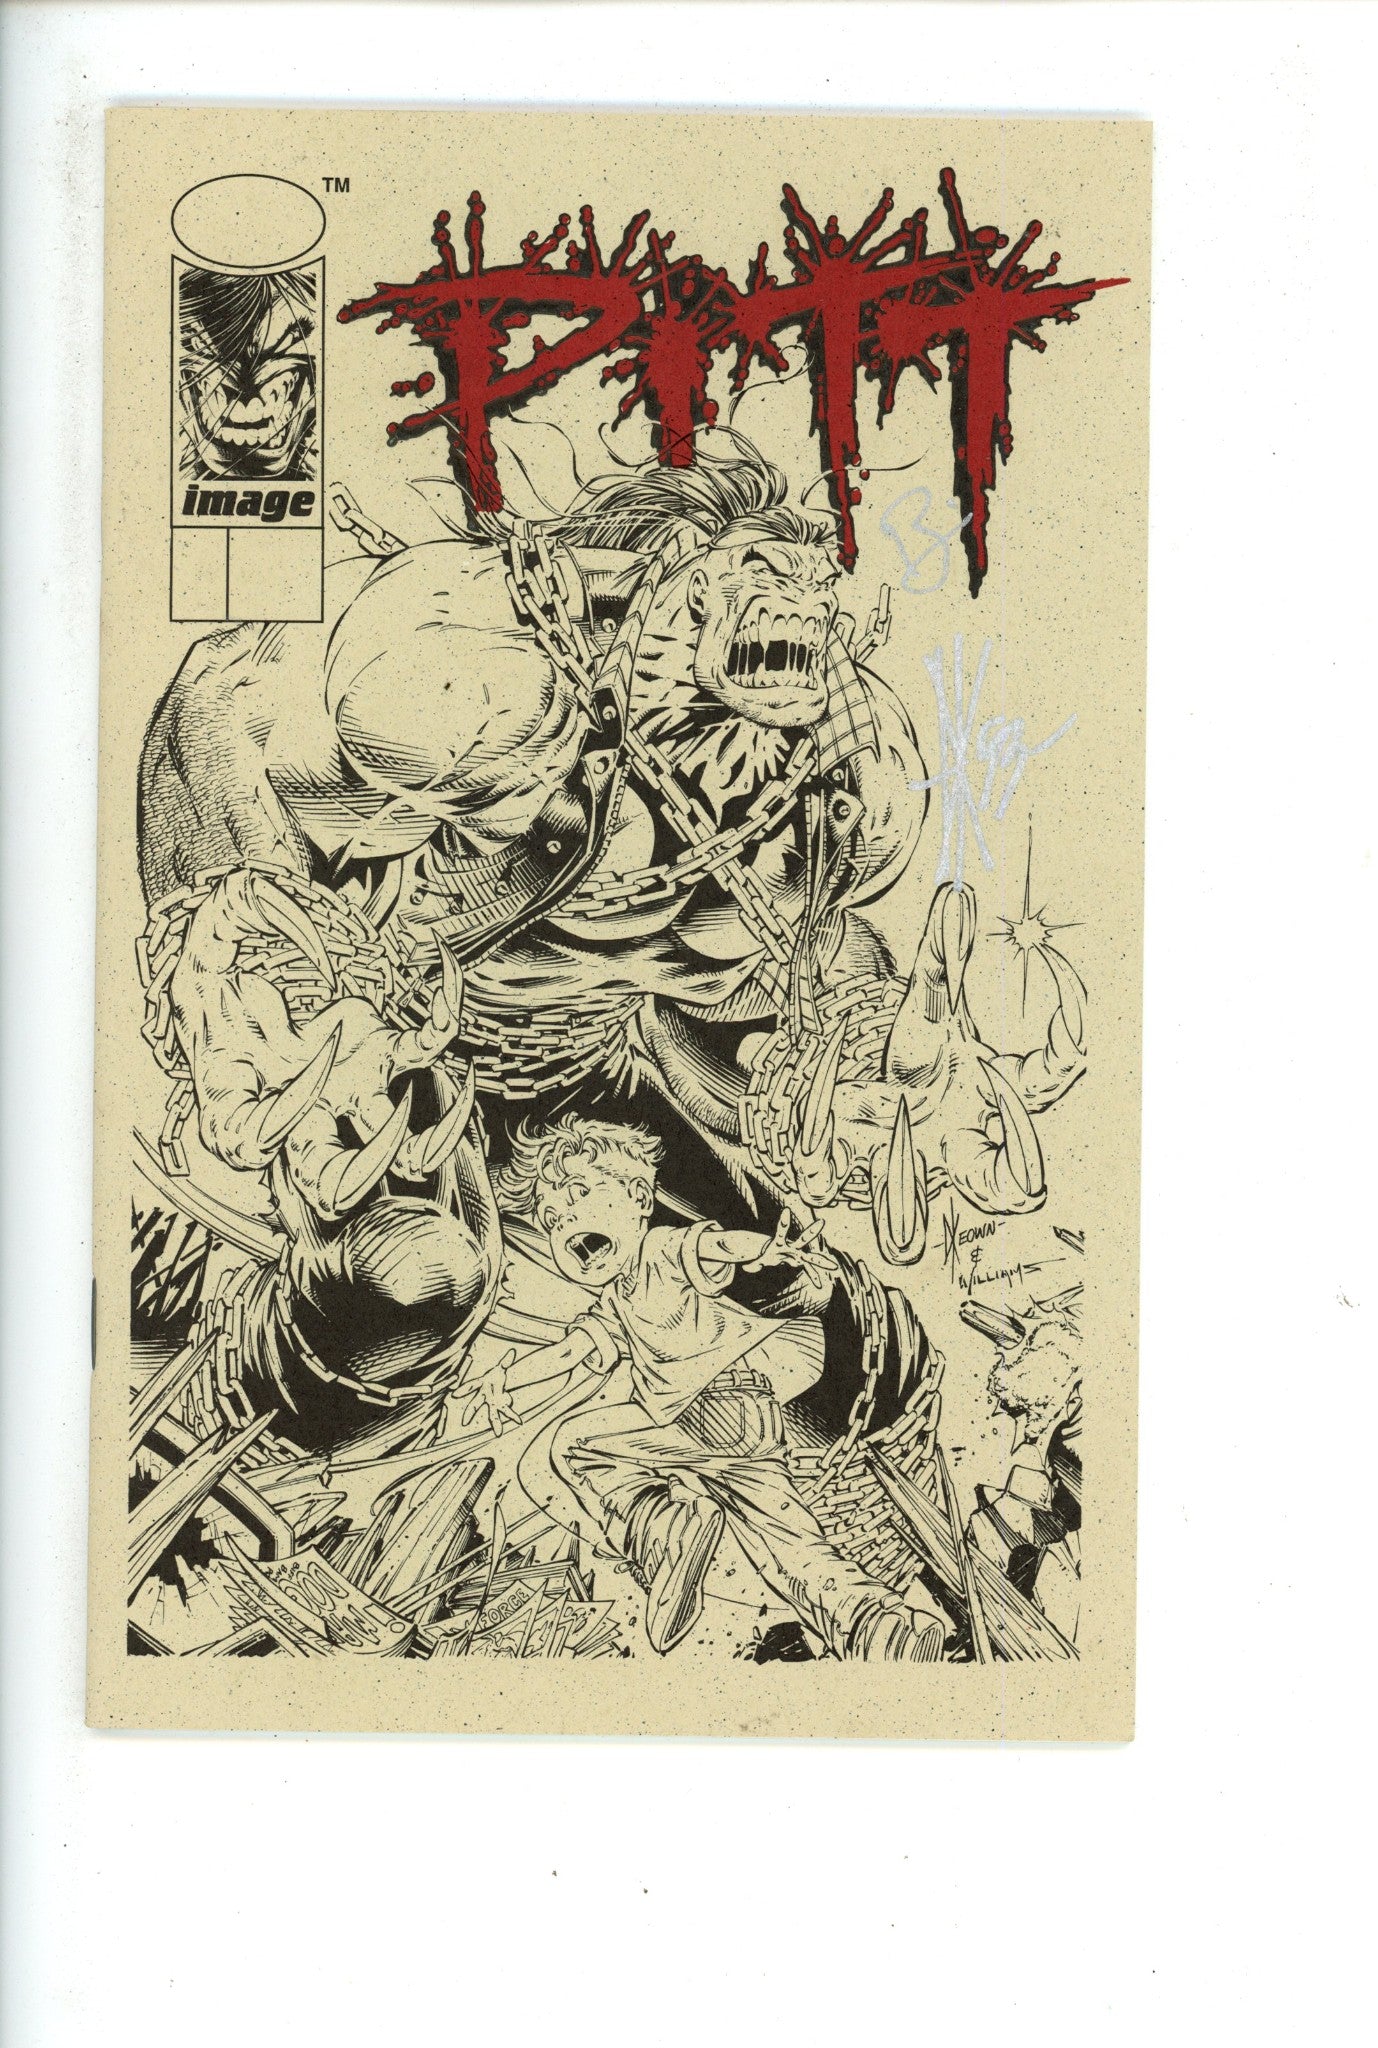 Pitt 2 Ashcan Signed, Keown Holton - Not Numbered VF